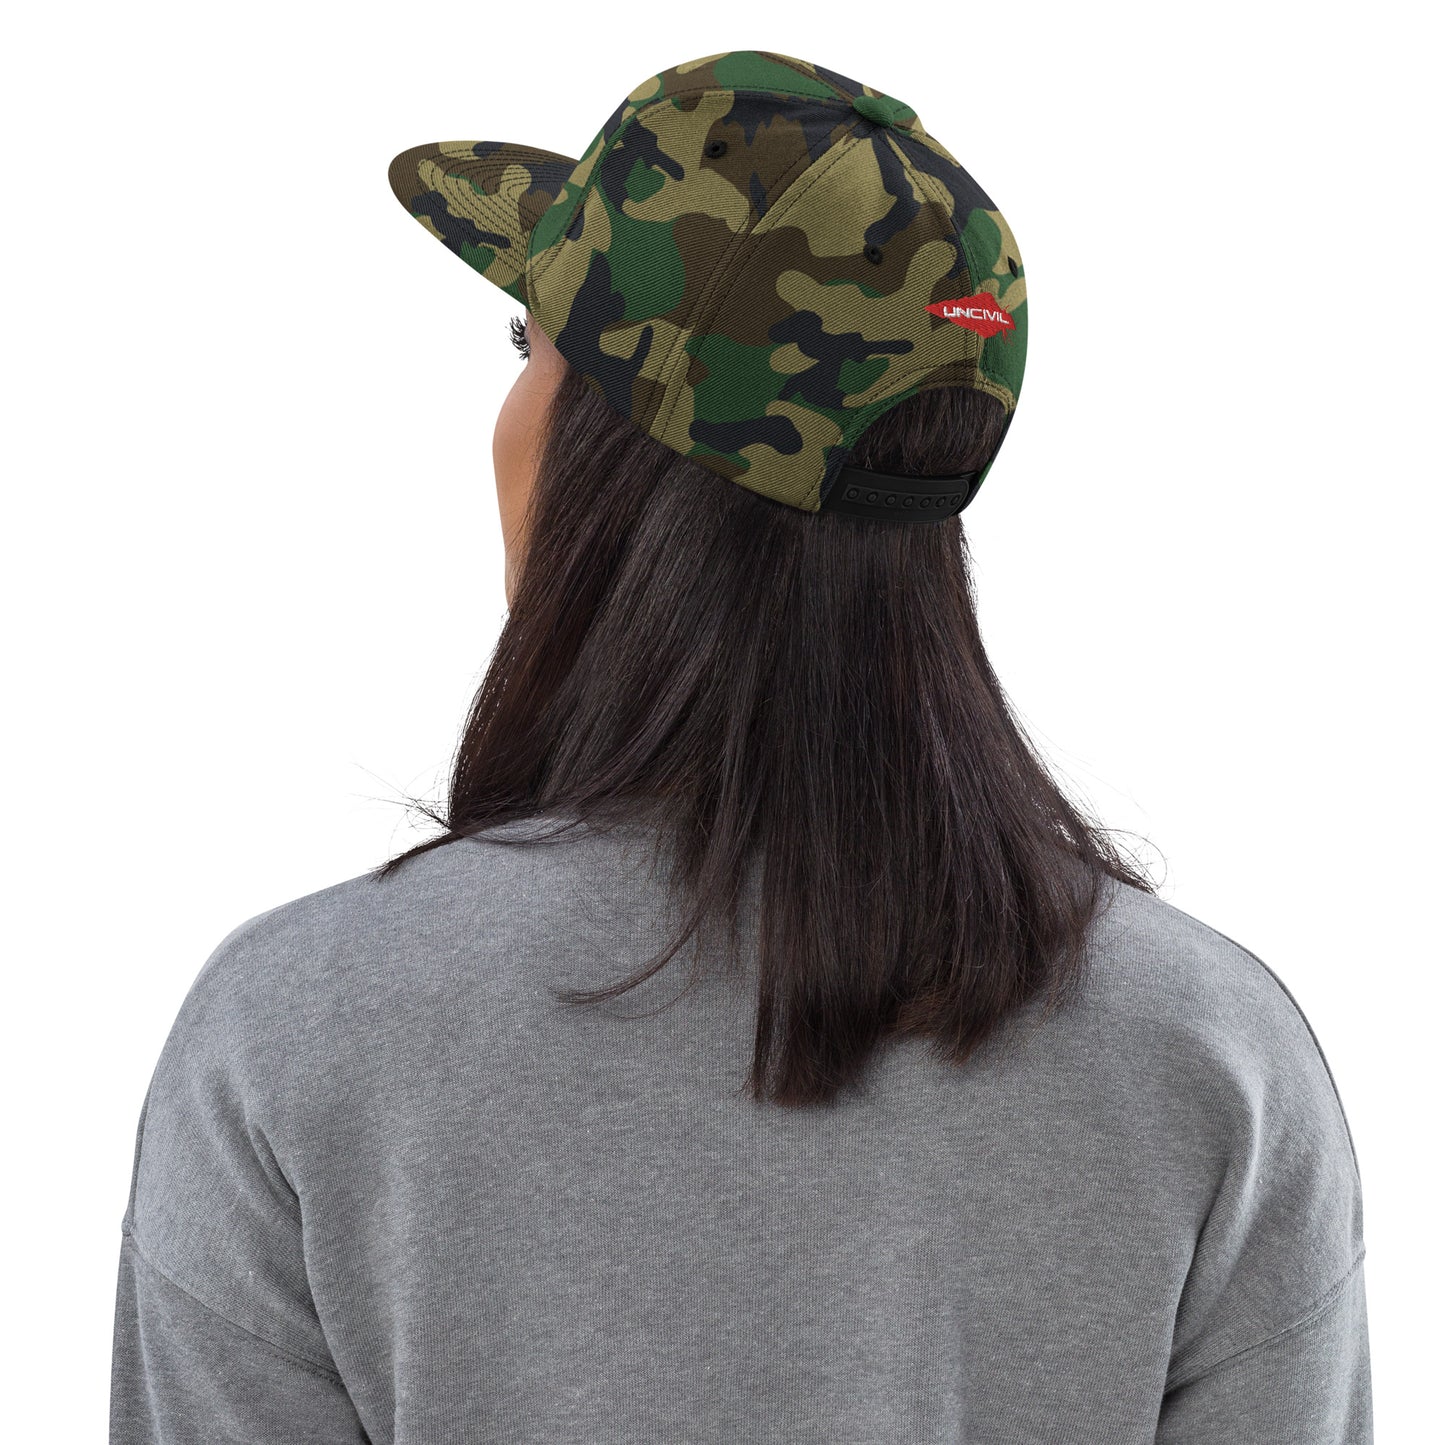 Camo Keys to the City, Halligan Bar classic snapback hat for firefighters